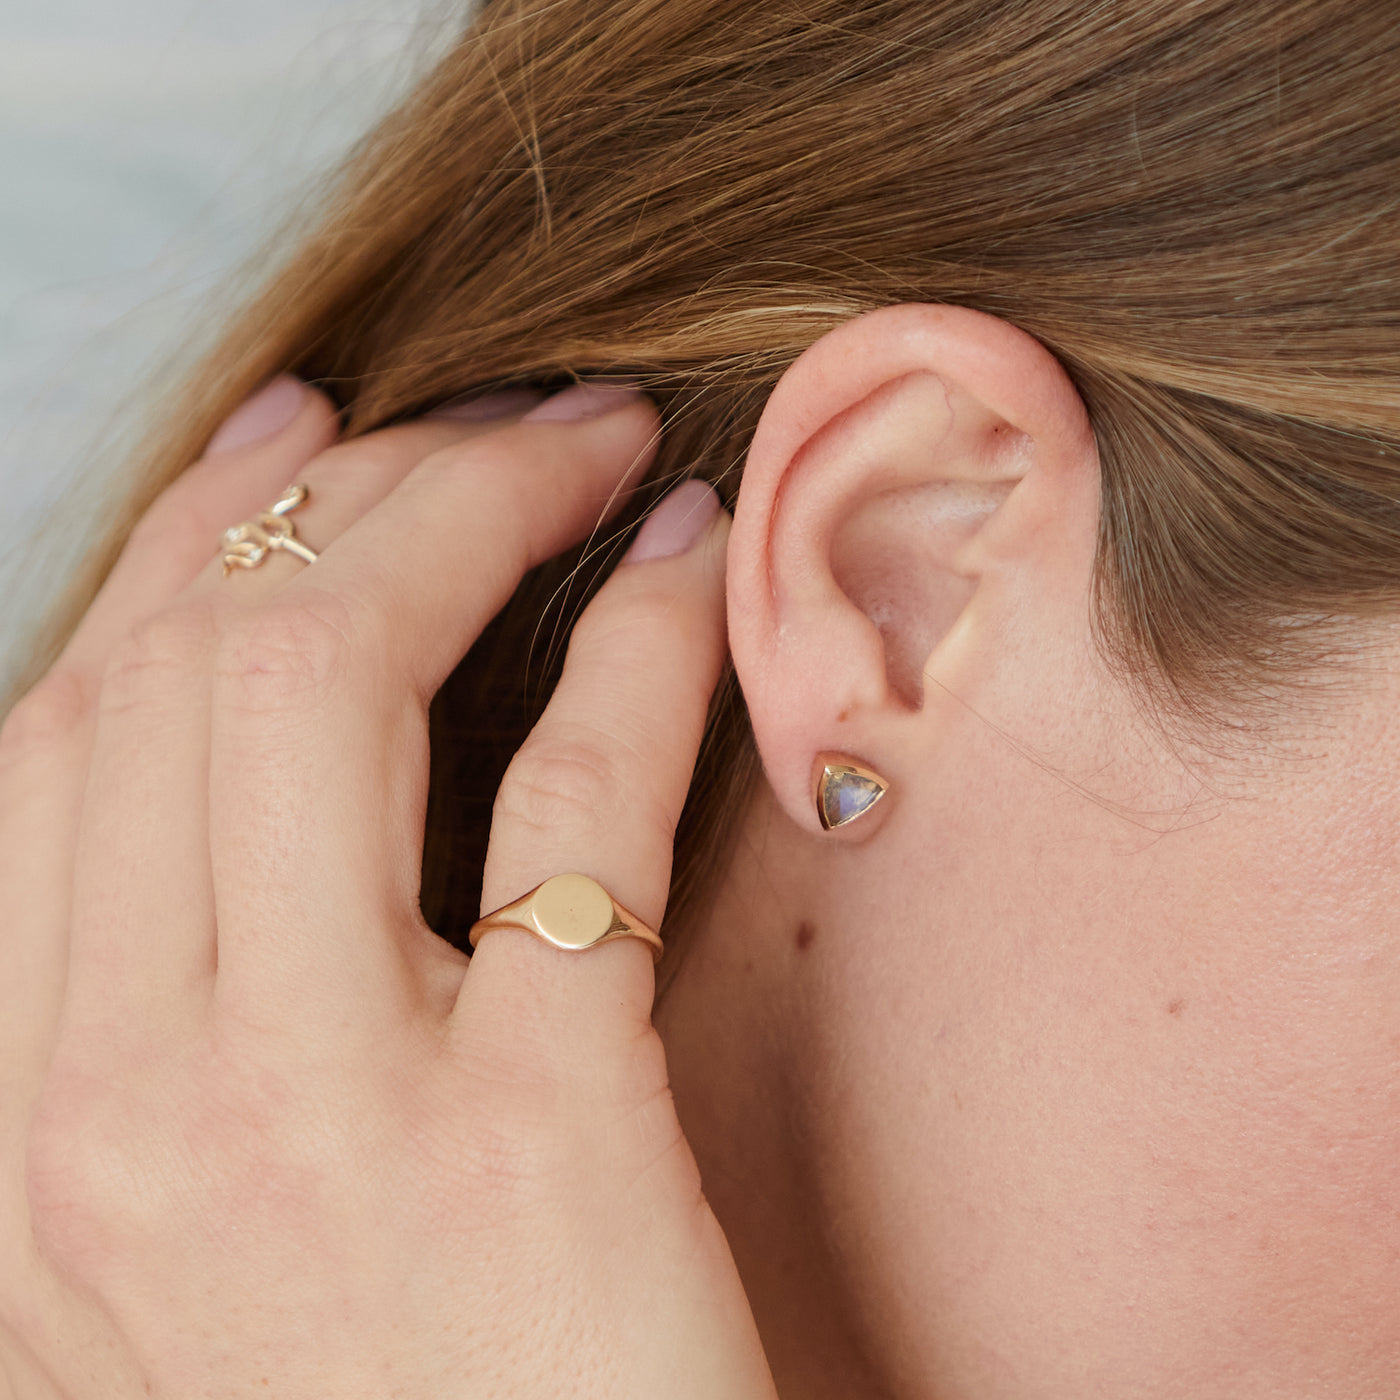 Model running her hand through her hair. She is wearing a trillion cut labradorite earring and two yellow gold rings on her fingers.